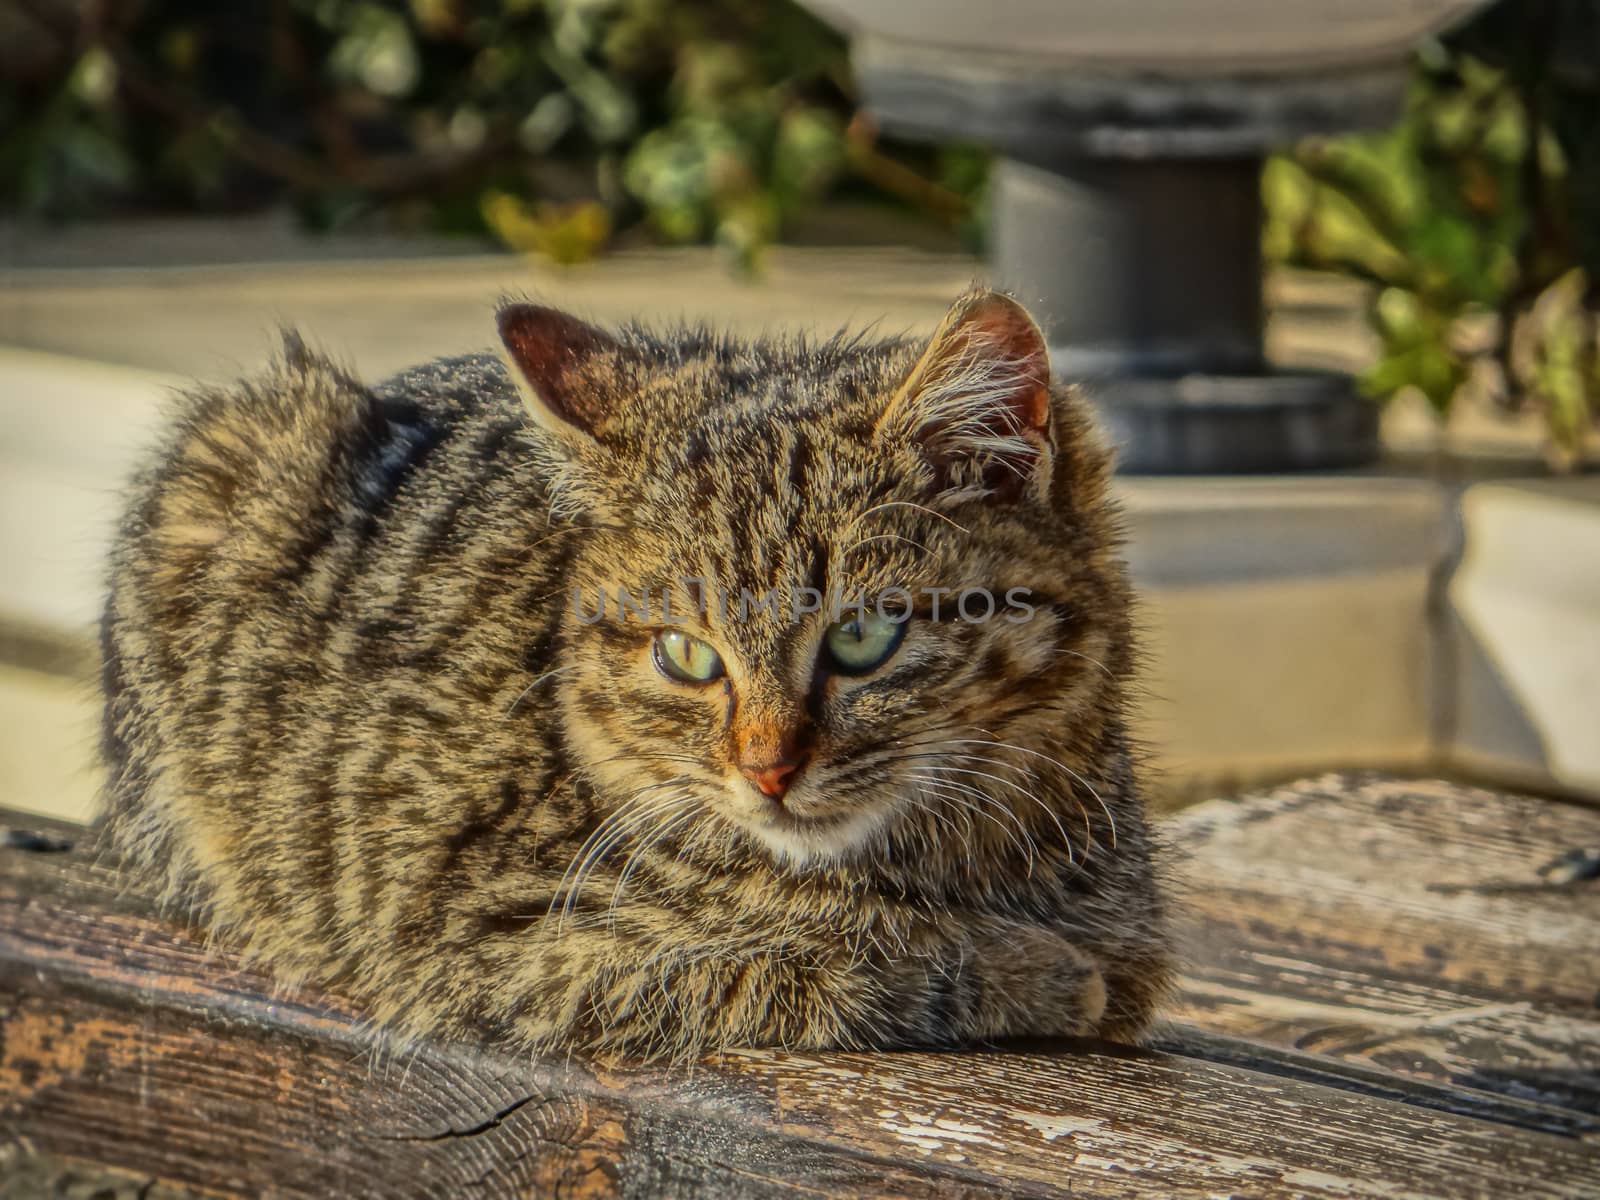 Small and fuzzy street kitty cat sunbathing on a wooden bench. by justbrotography